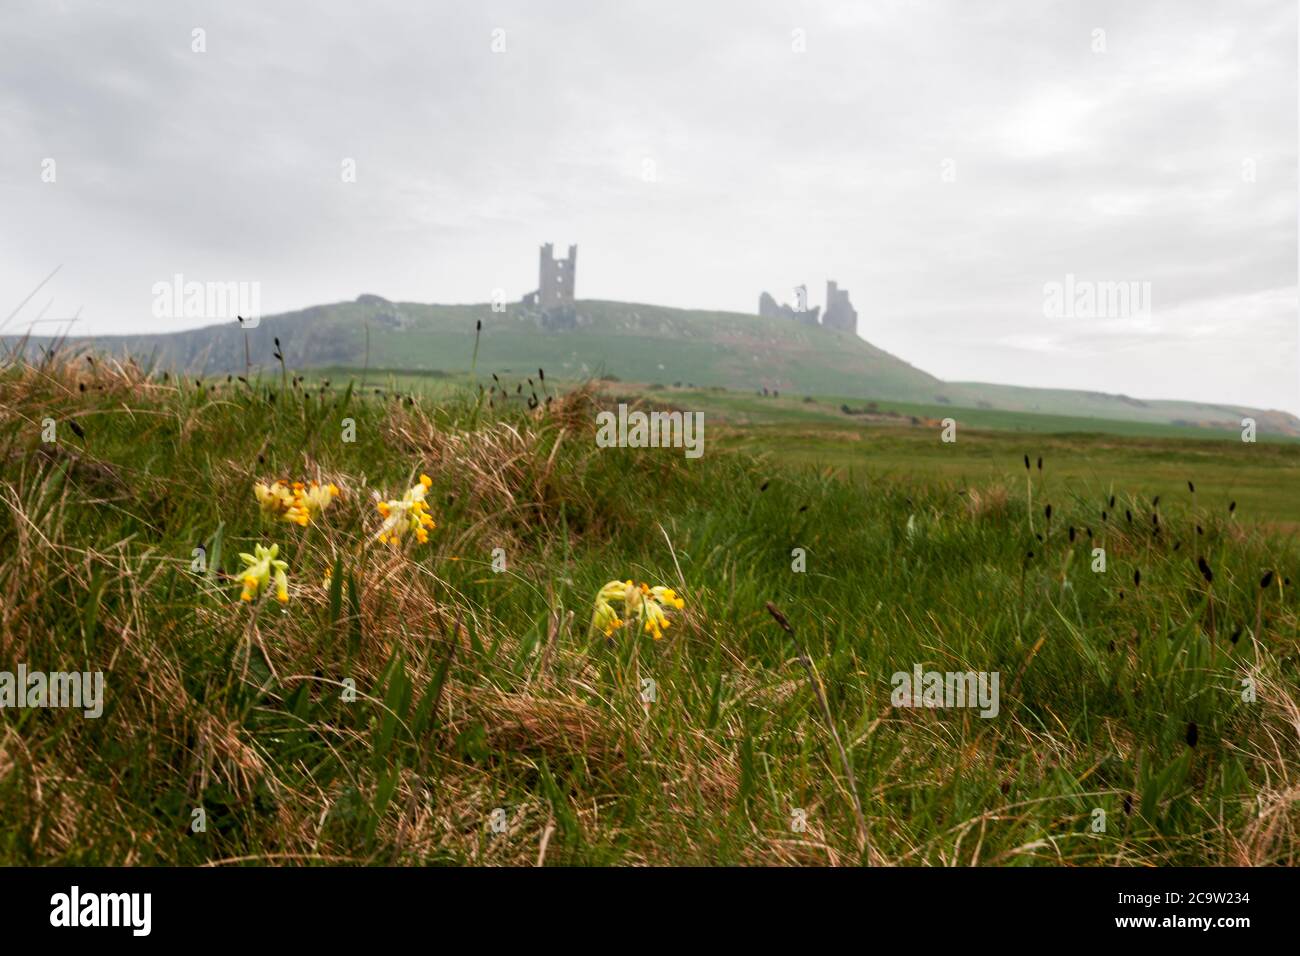 The ruins of Dunstanburgh Castle, Northumberland, England, UK from Embleton Bay: cowslips (Primula veris) in the foreground Stock Photo